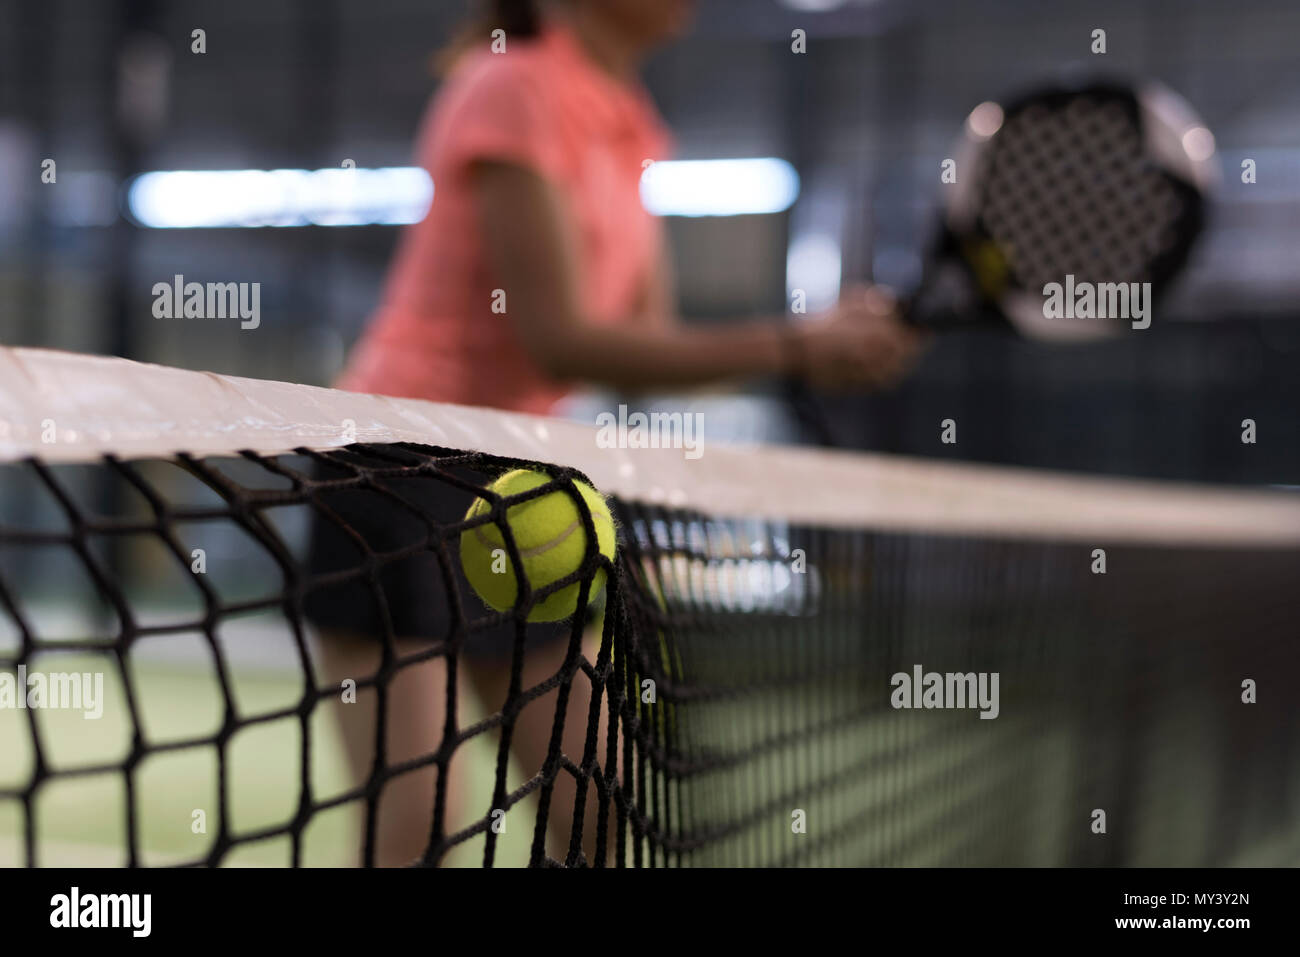 paddle tennis shot in macth, woman in background Stock Photo